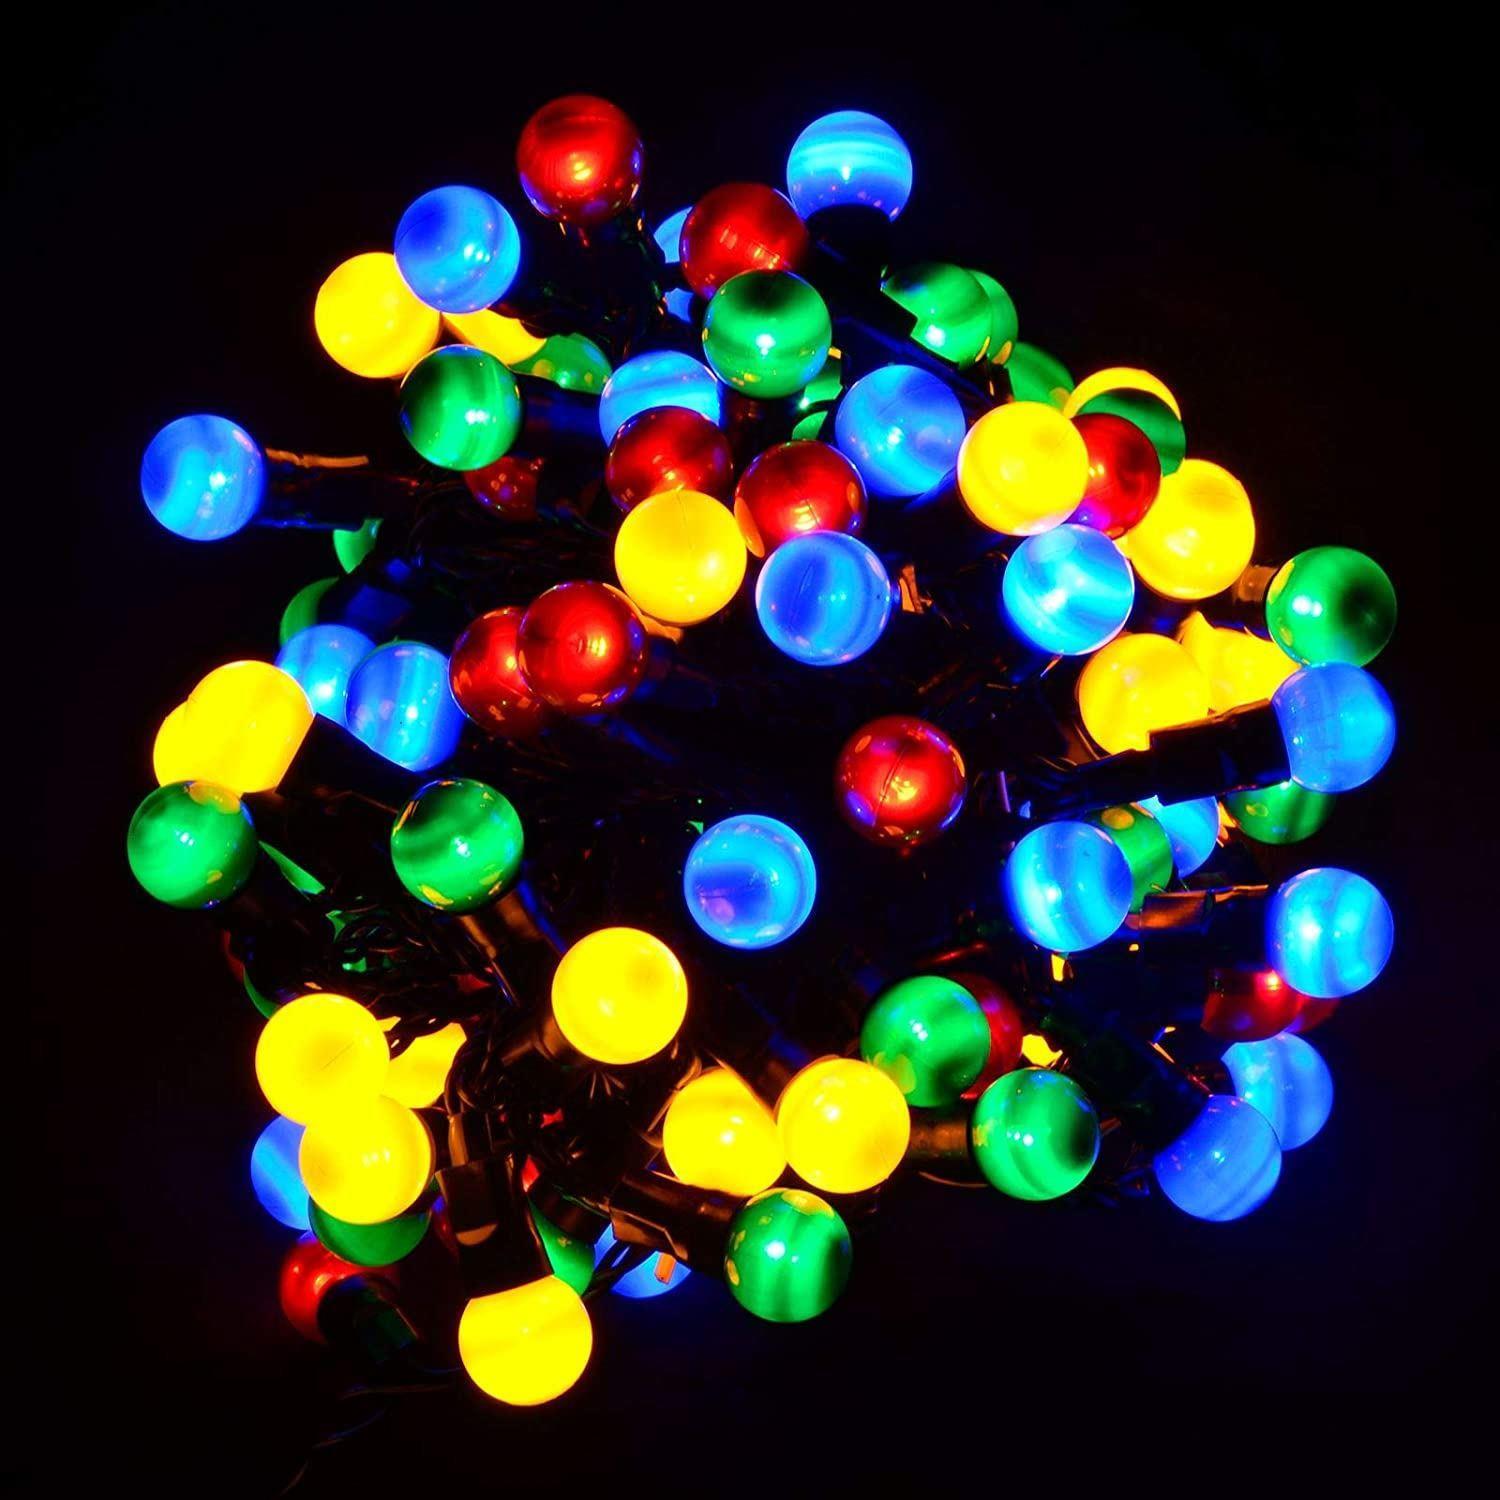 100 Berry Christmas LED Lights Multi Coloured by Geezy - The Magic Toy Shop